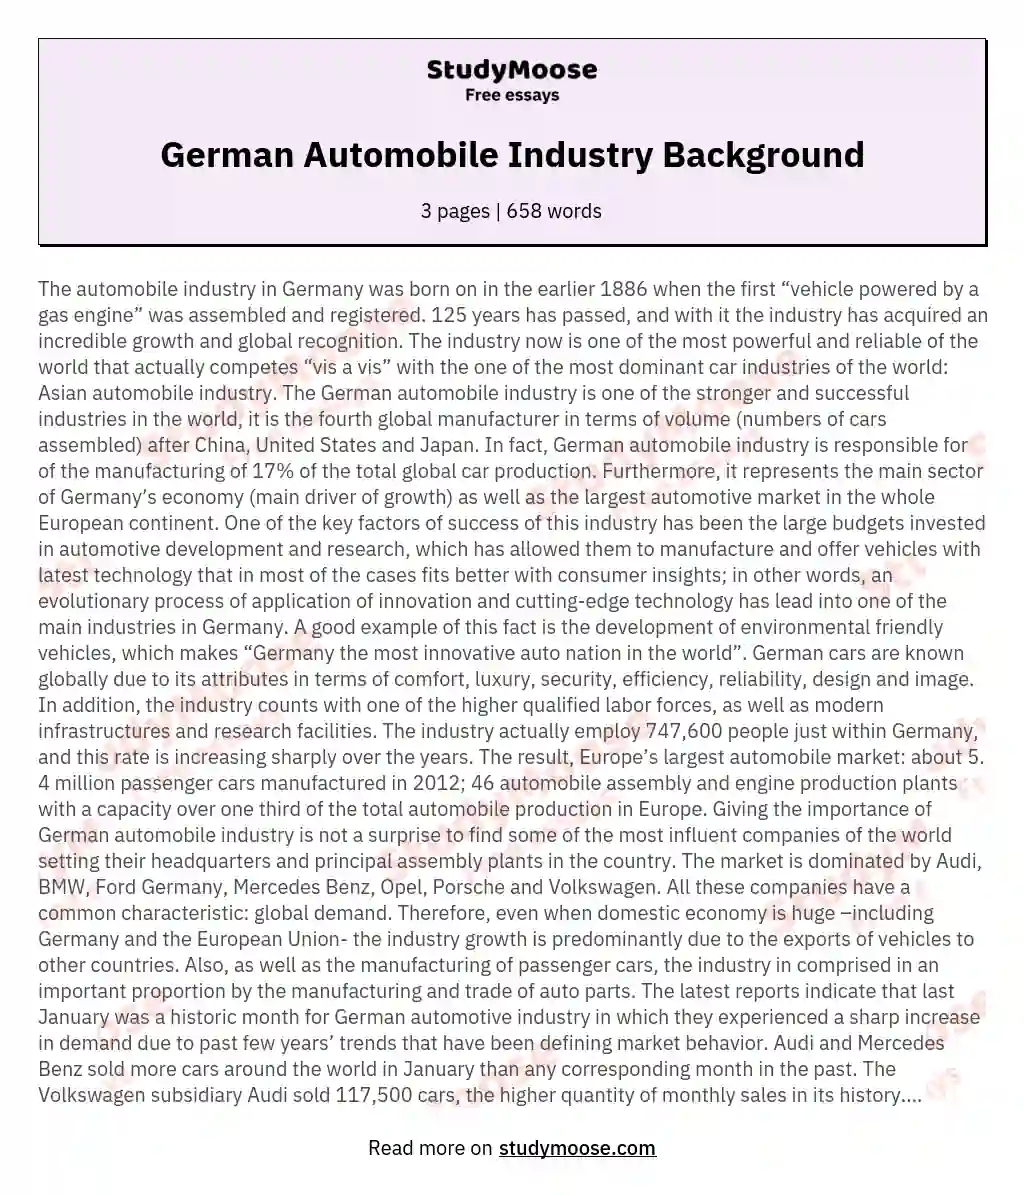 German Automobile Industry Background